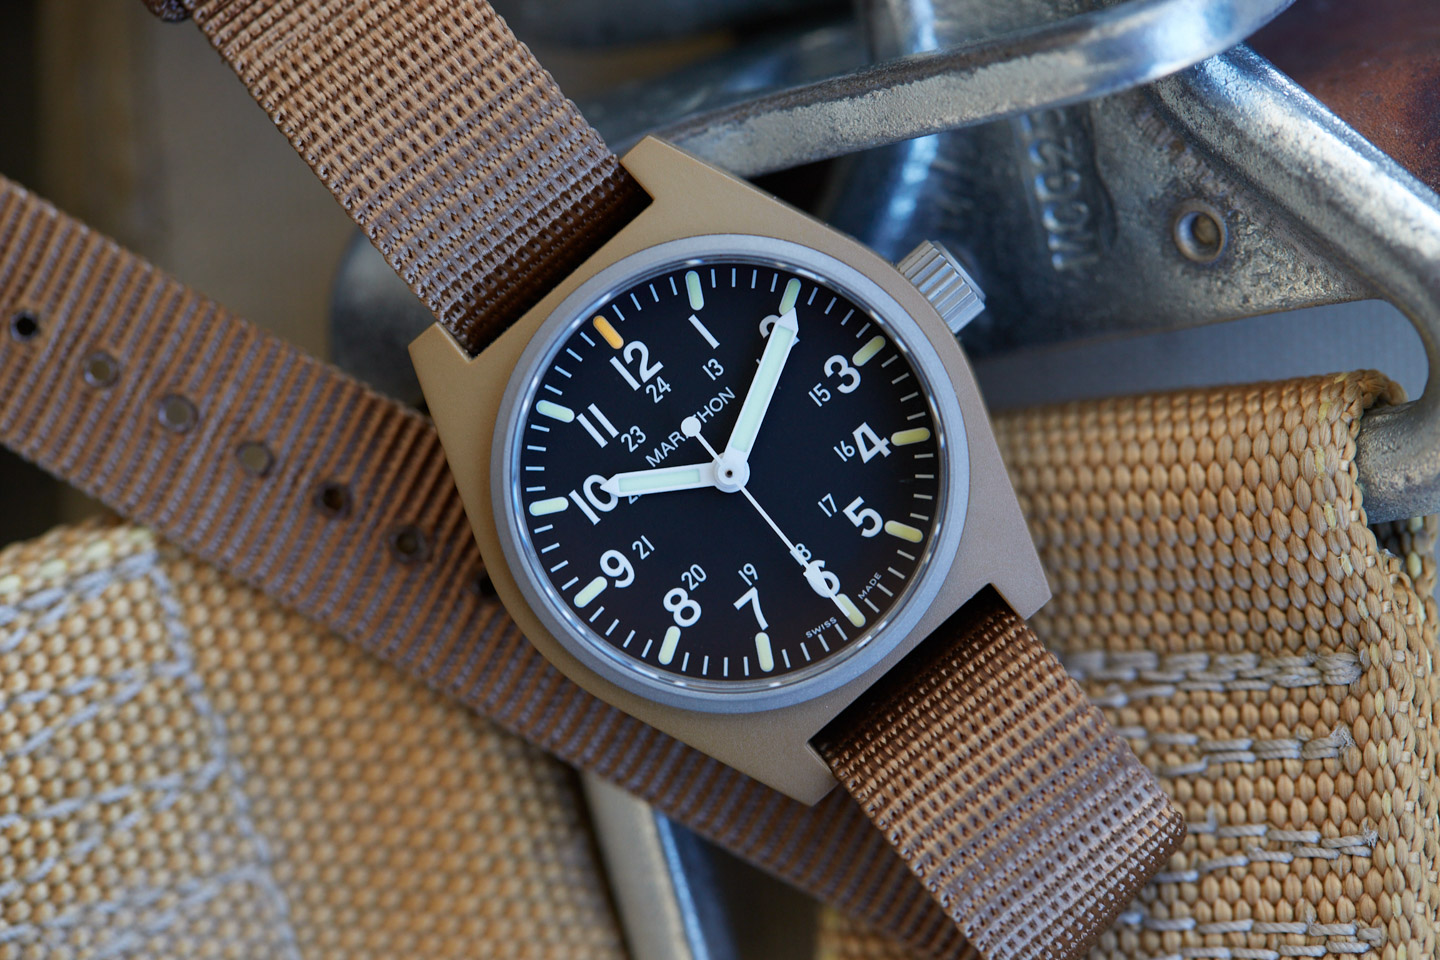 Video Celebrating 80 Years Of Purpose-Built Military Watches By Marathon